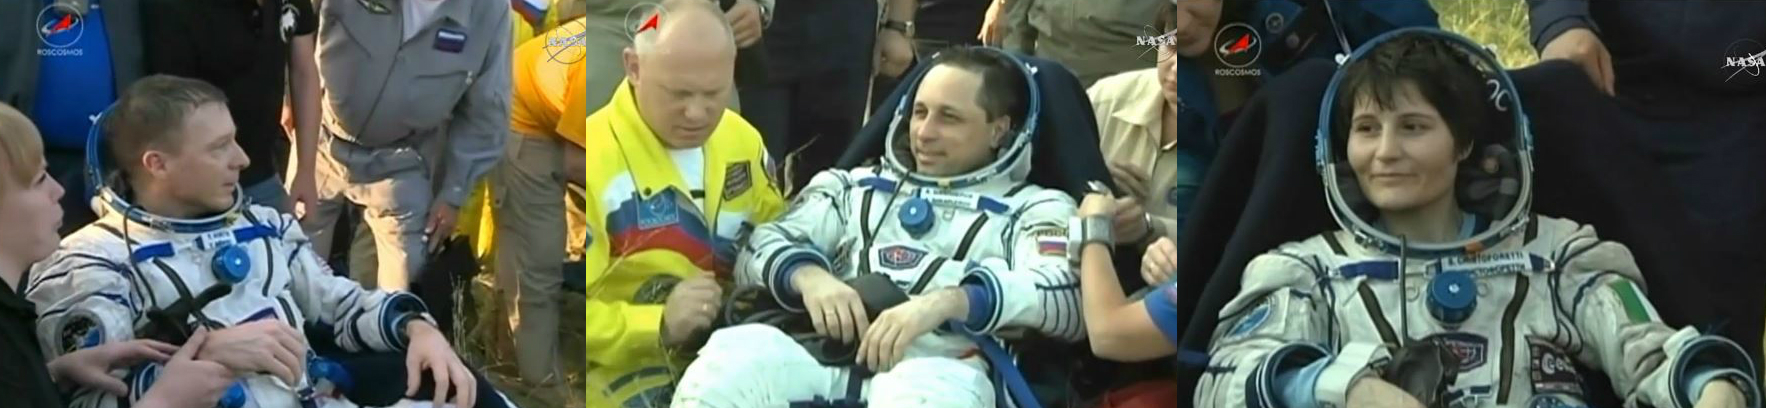 ISS Expedition 43 returns to Earth